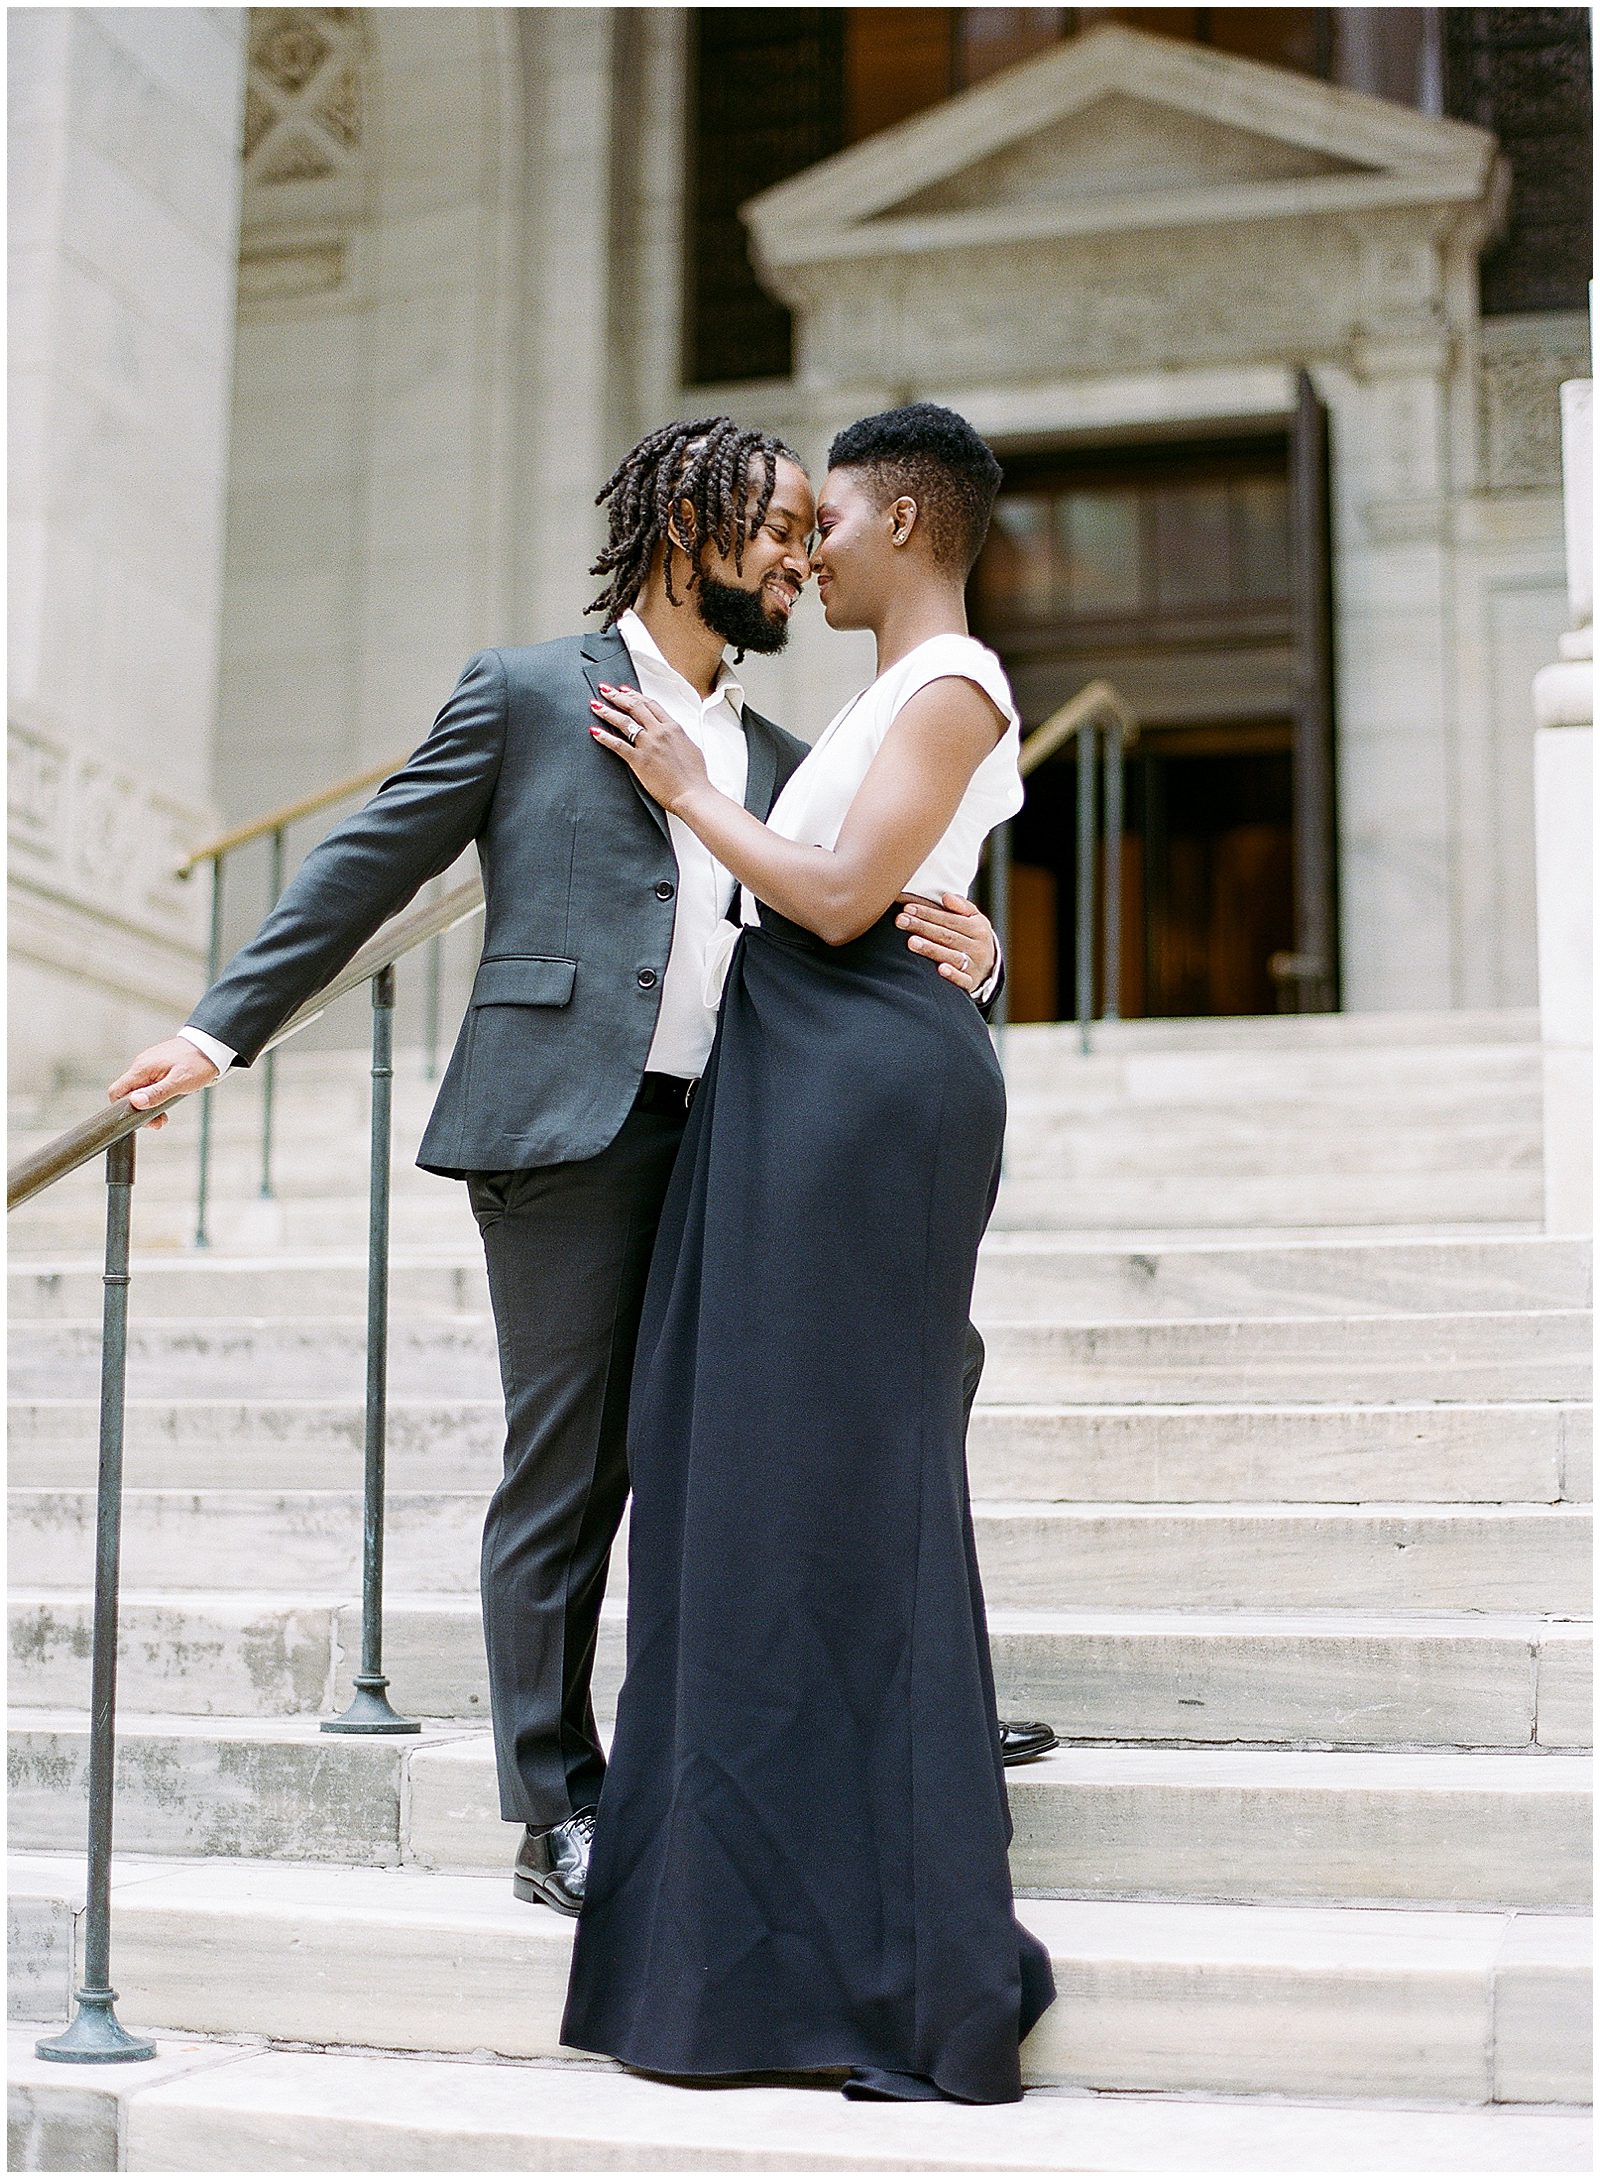 New York City Engagement Photos Couple Nose to Nose on Stairs at Library Photo